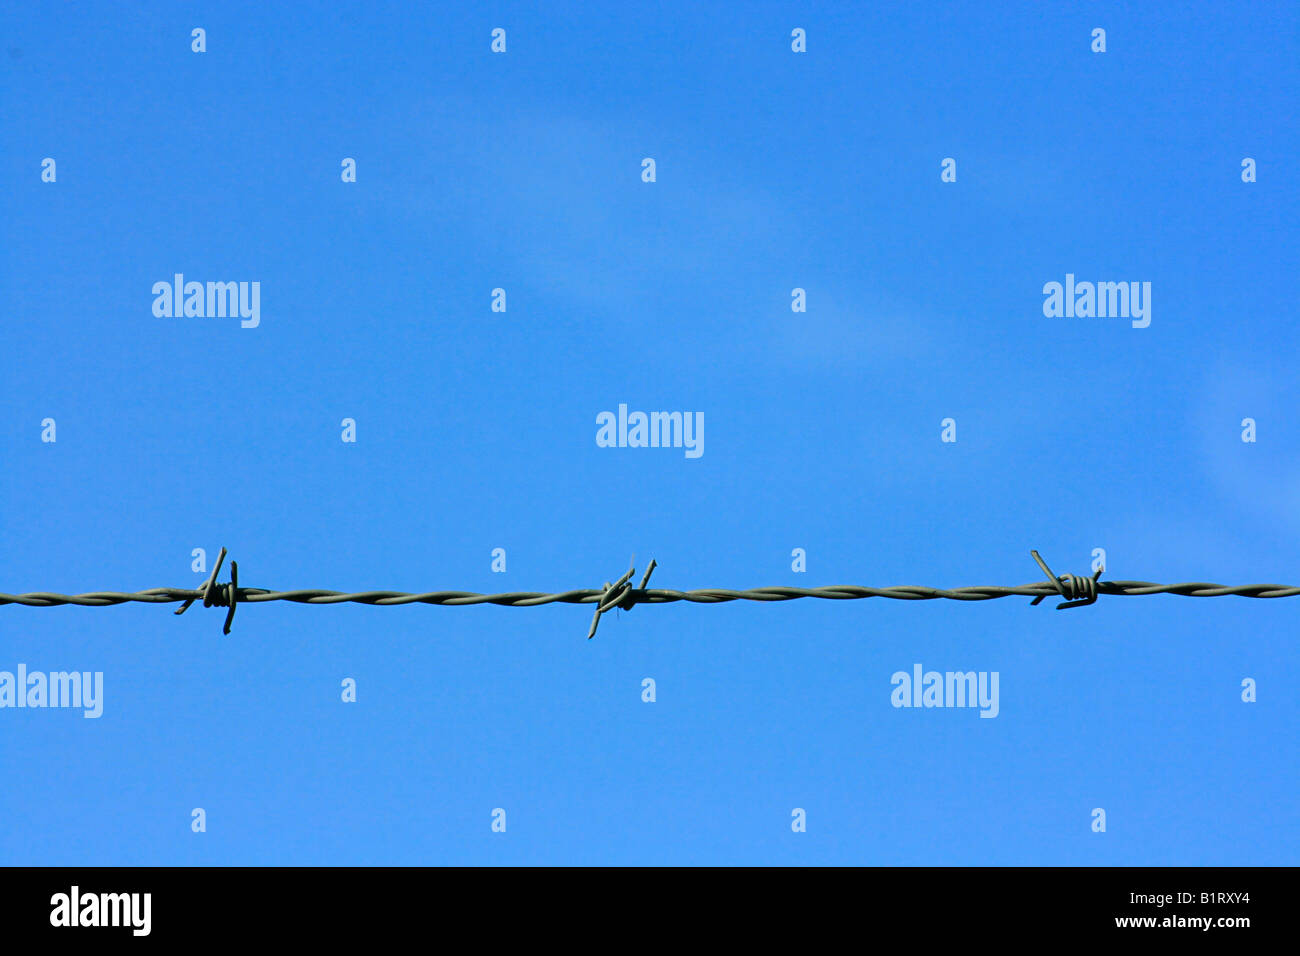 Blue sky and barbwire, barbedwire Stock Photo